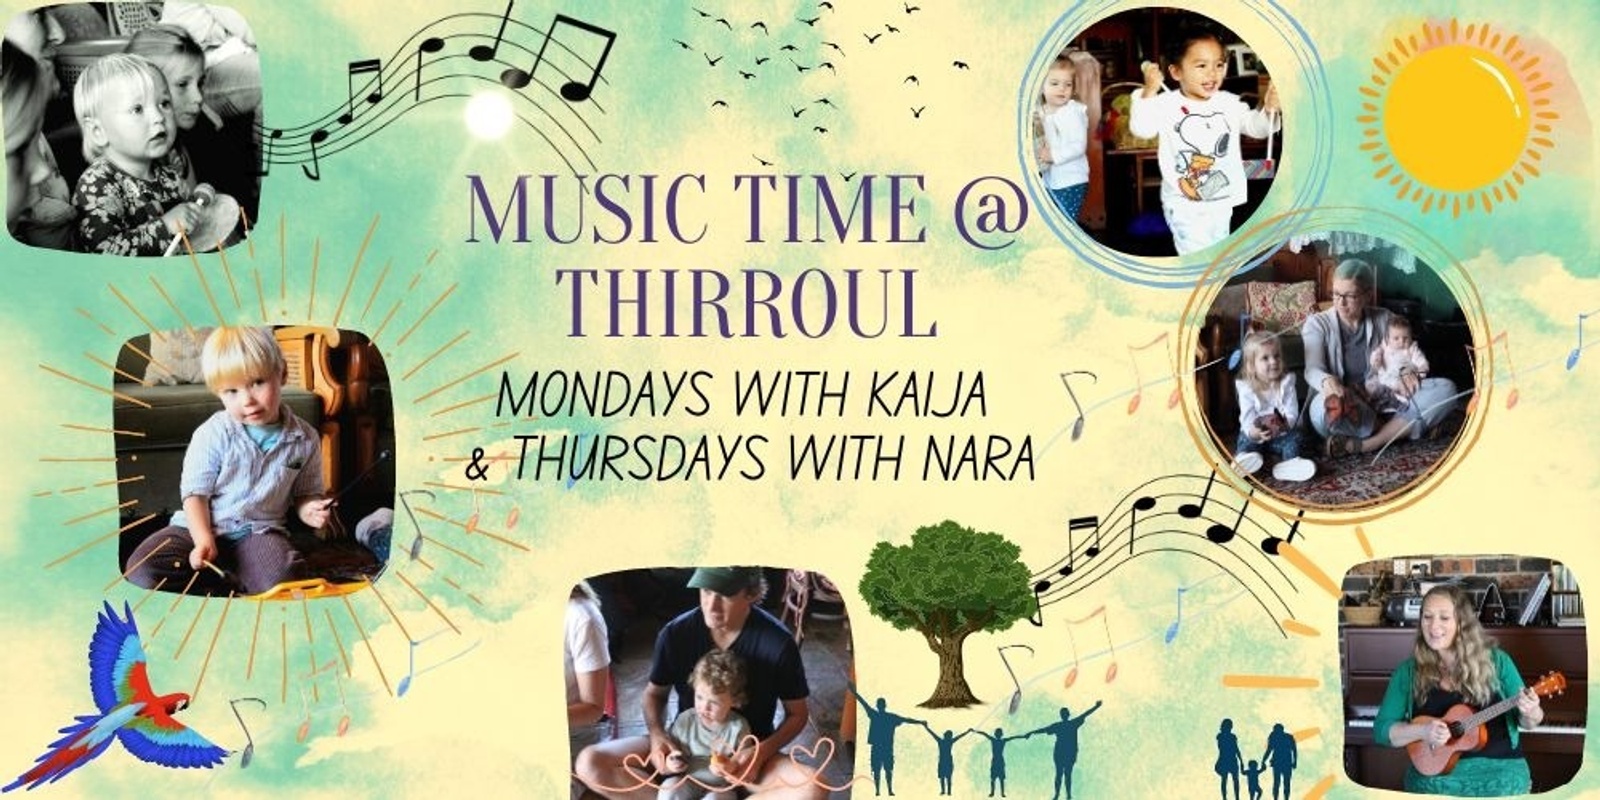 Banner image for Music Time @ Thirroul Monday 10.30